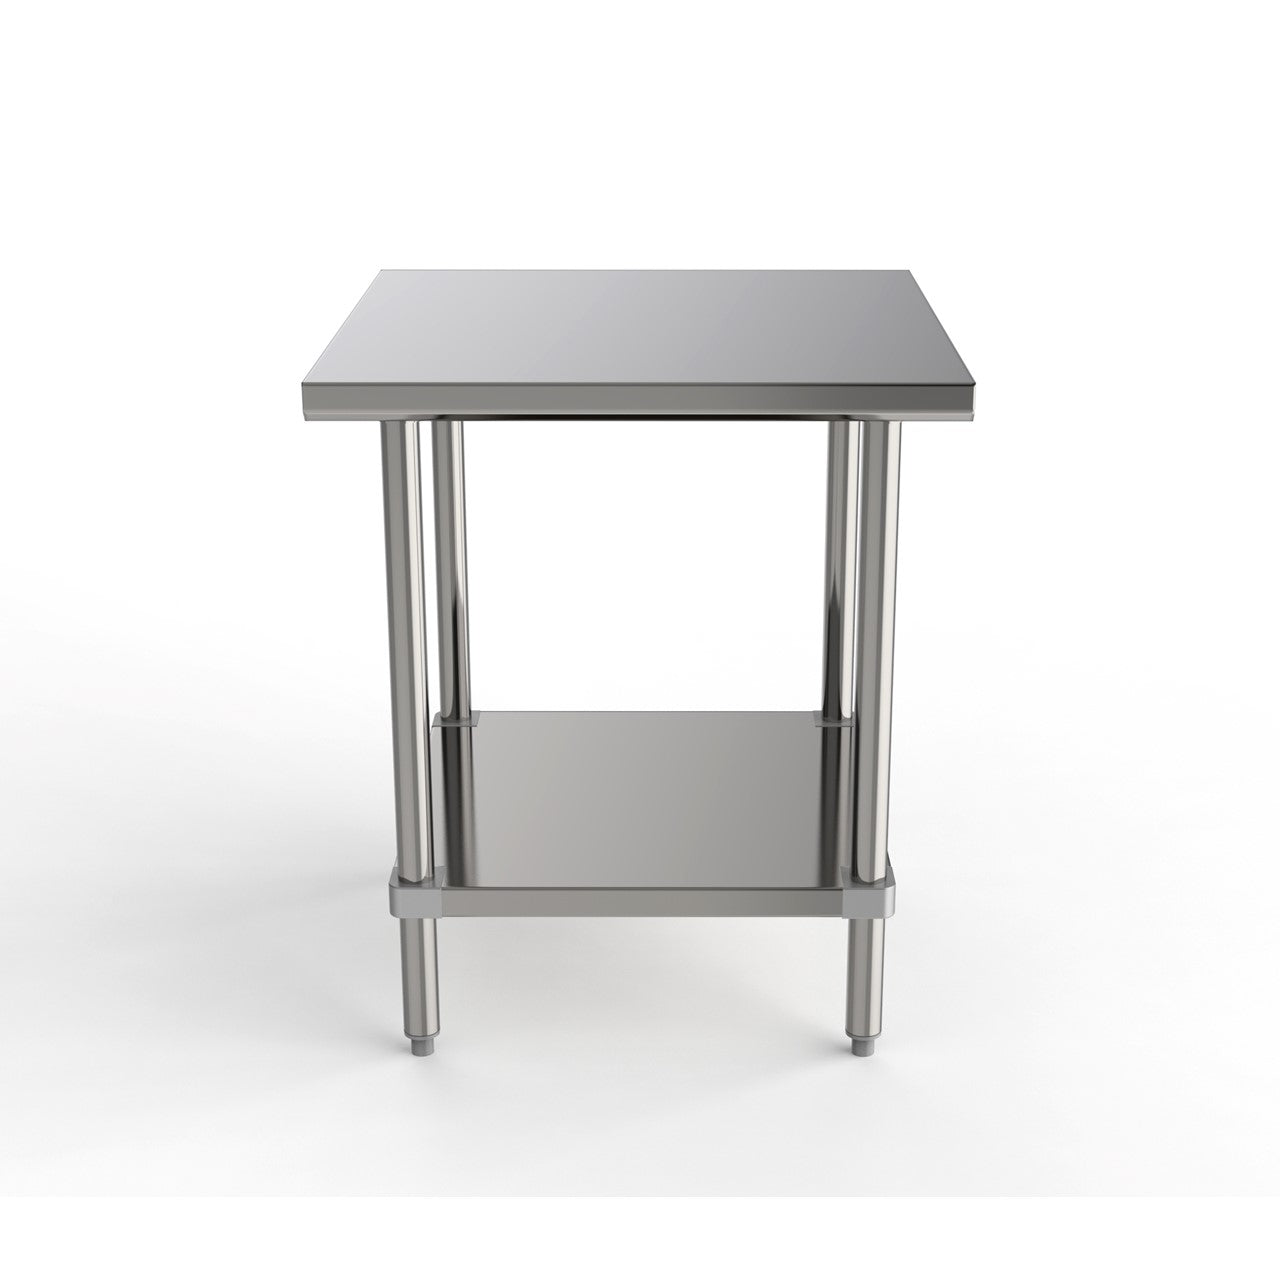 GSW Commercial Grade Flat Top Work Table with Stainless Steel Top, Galvanized Undershelf & Legs, Adjustable Bullet Feet, NSF/ETL Approved to Meet Sanitation Food Service Standard 37 (30"W x 30"L x 35"H)